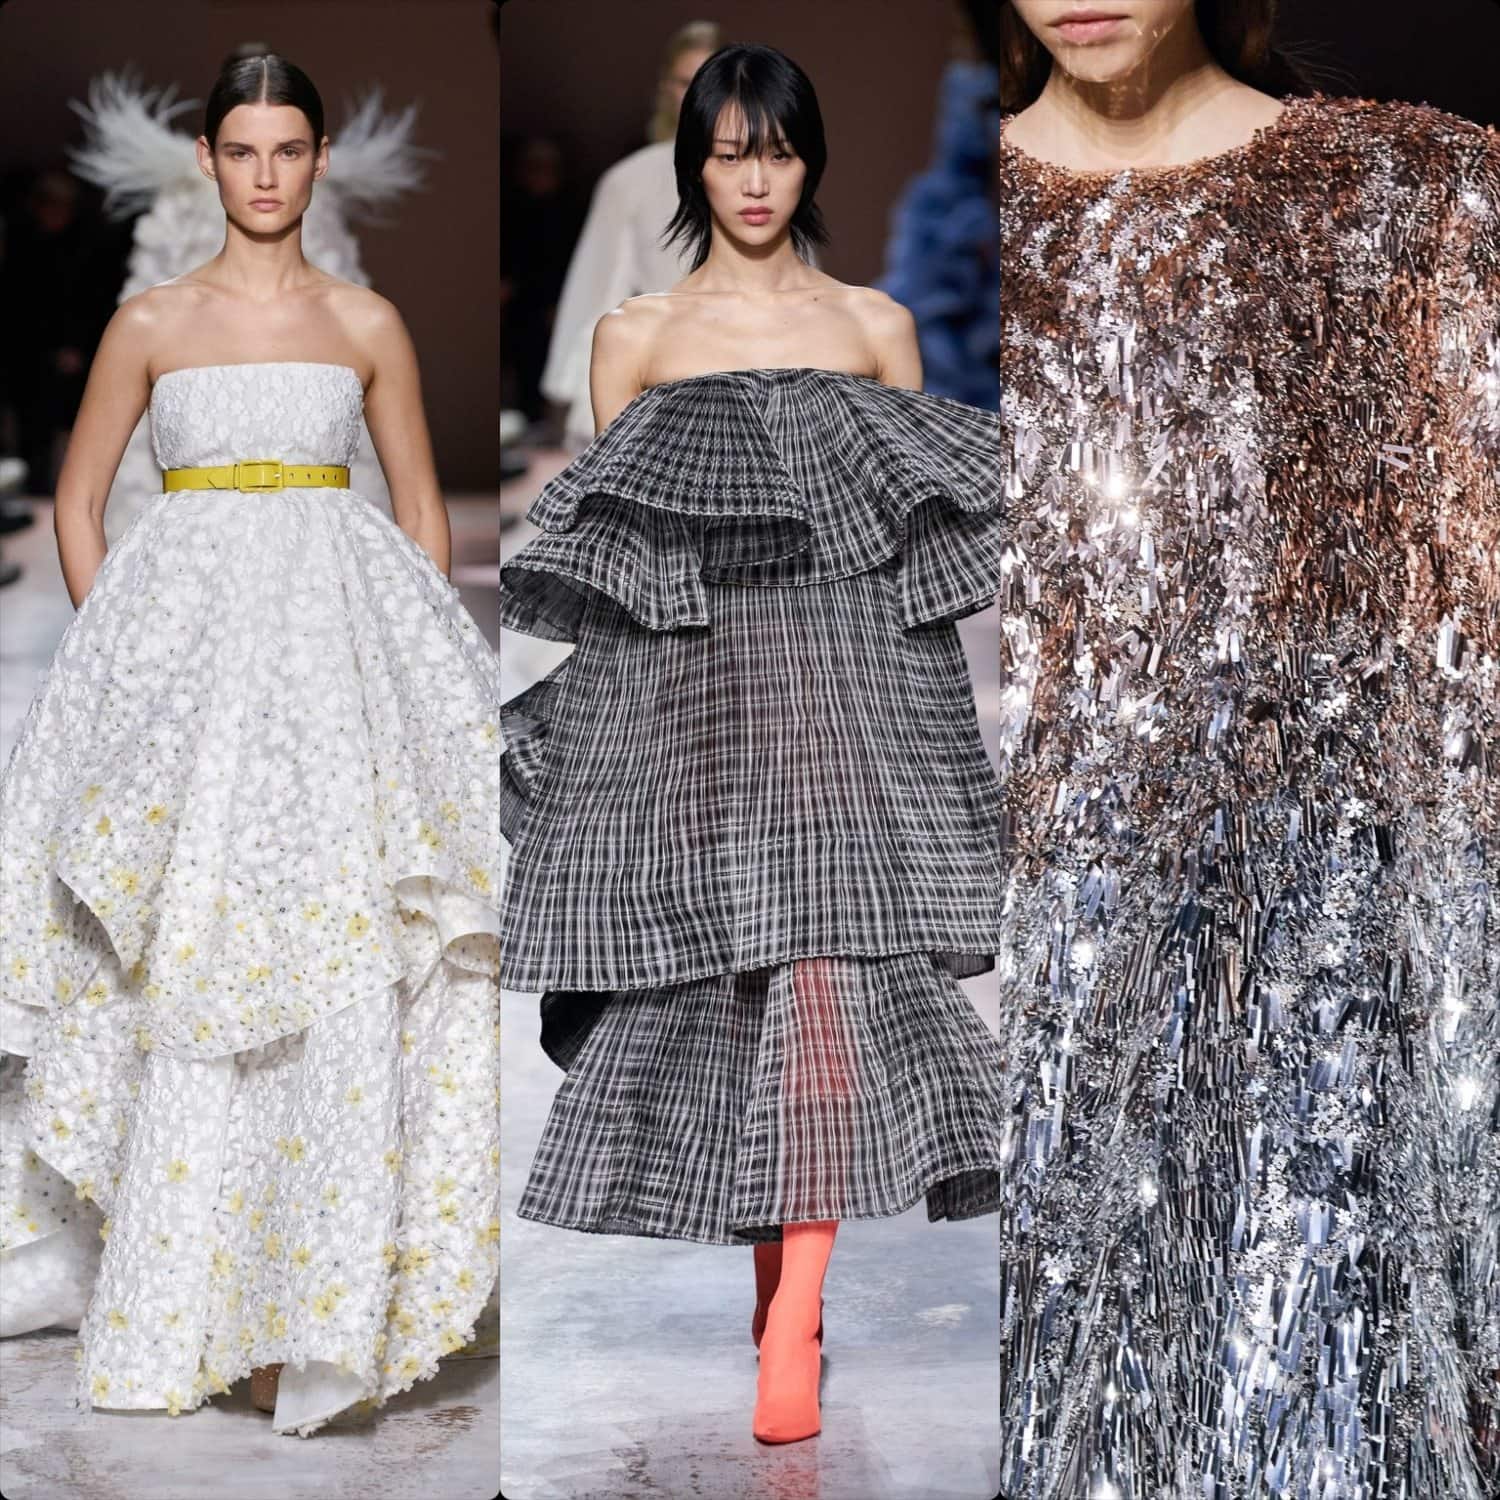 Givenchy Haute Couture Spring Summer 2020 Paris. RUNWAY MAGAZINE ® Collections. RUNWAY NOW / RUNWAY NEW